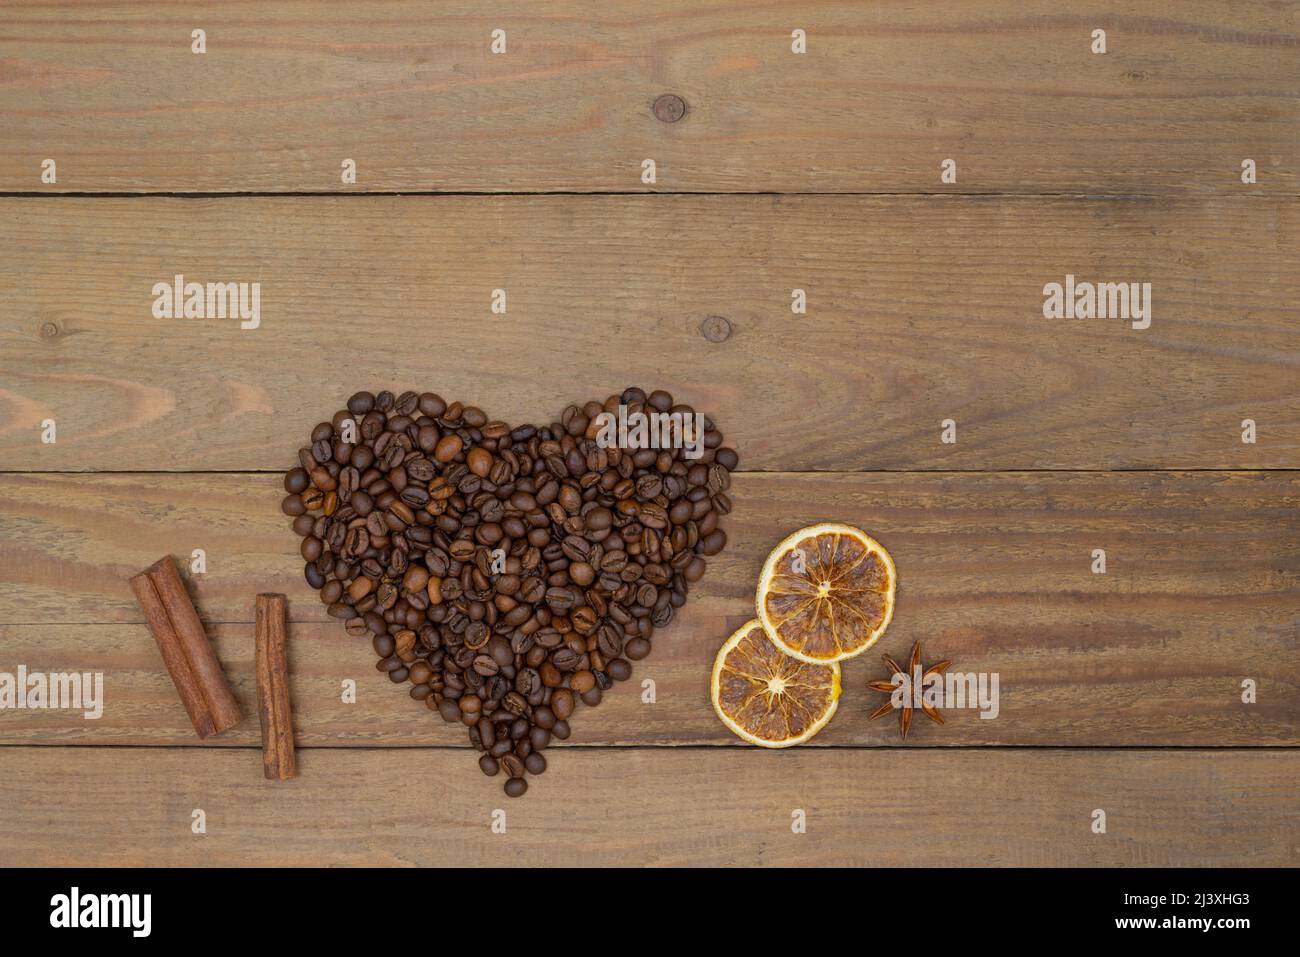 Coffee beans heart shape, cinnamon sticks and dry lemon slices on an old wooden background. Coffee design concept. Stock Photo